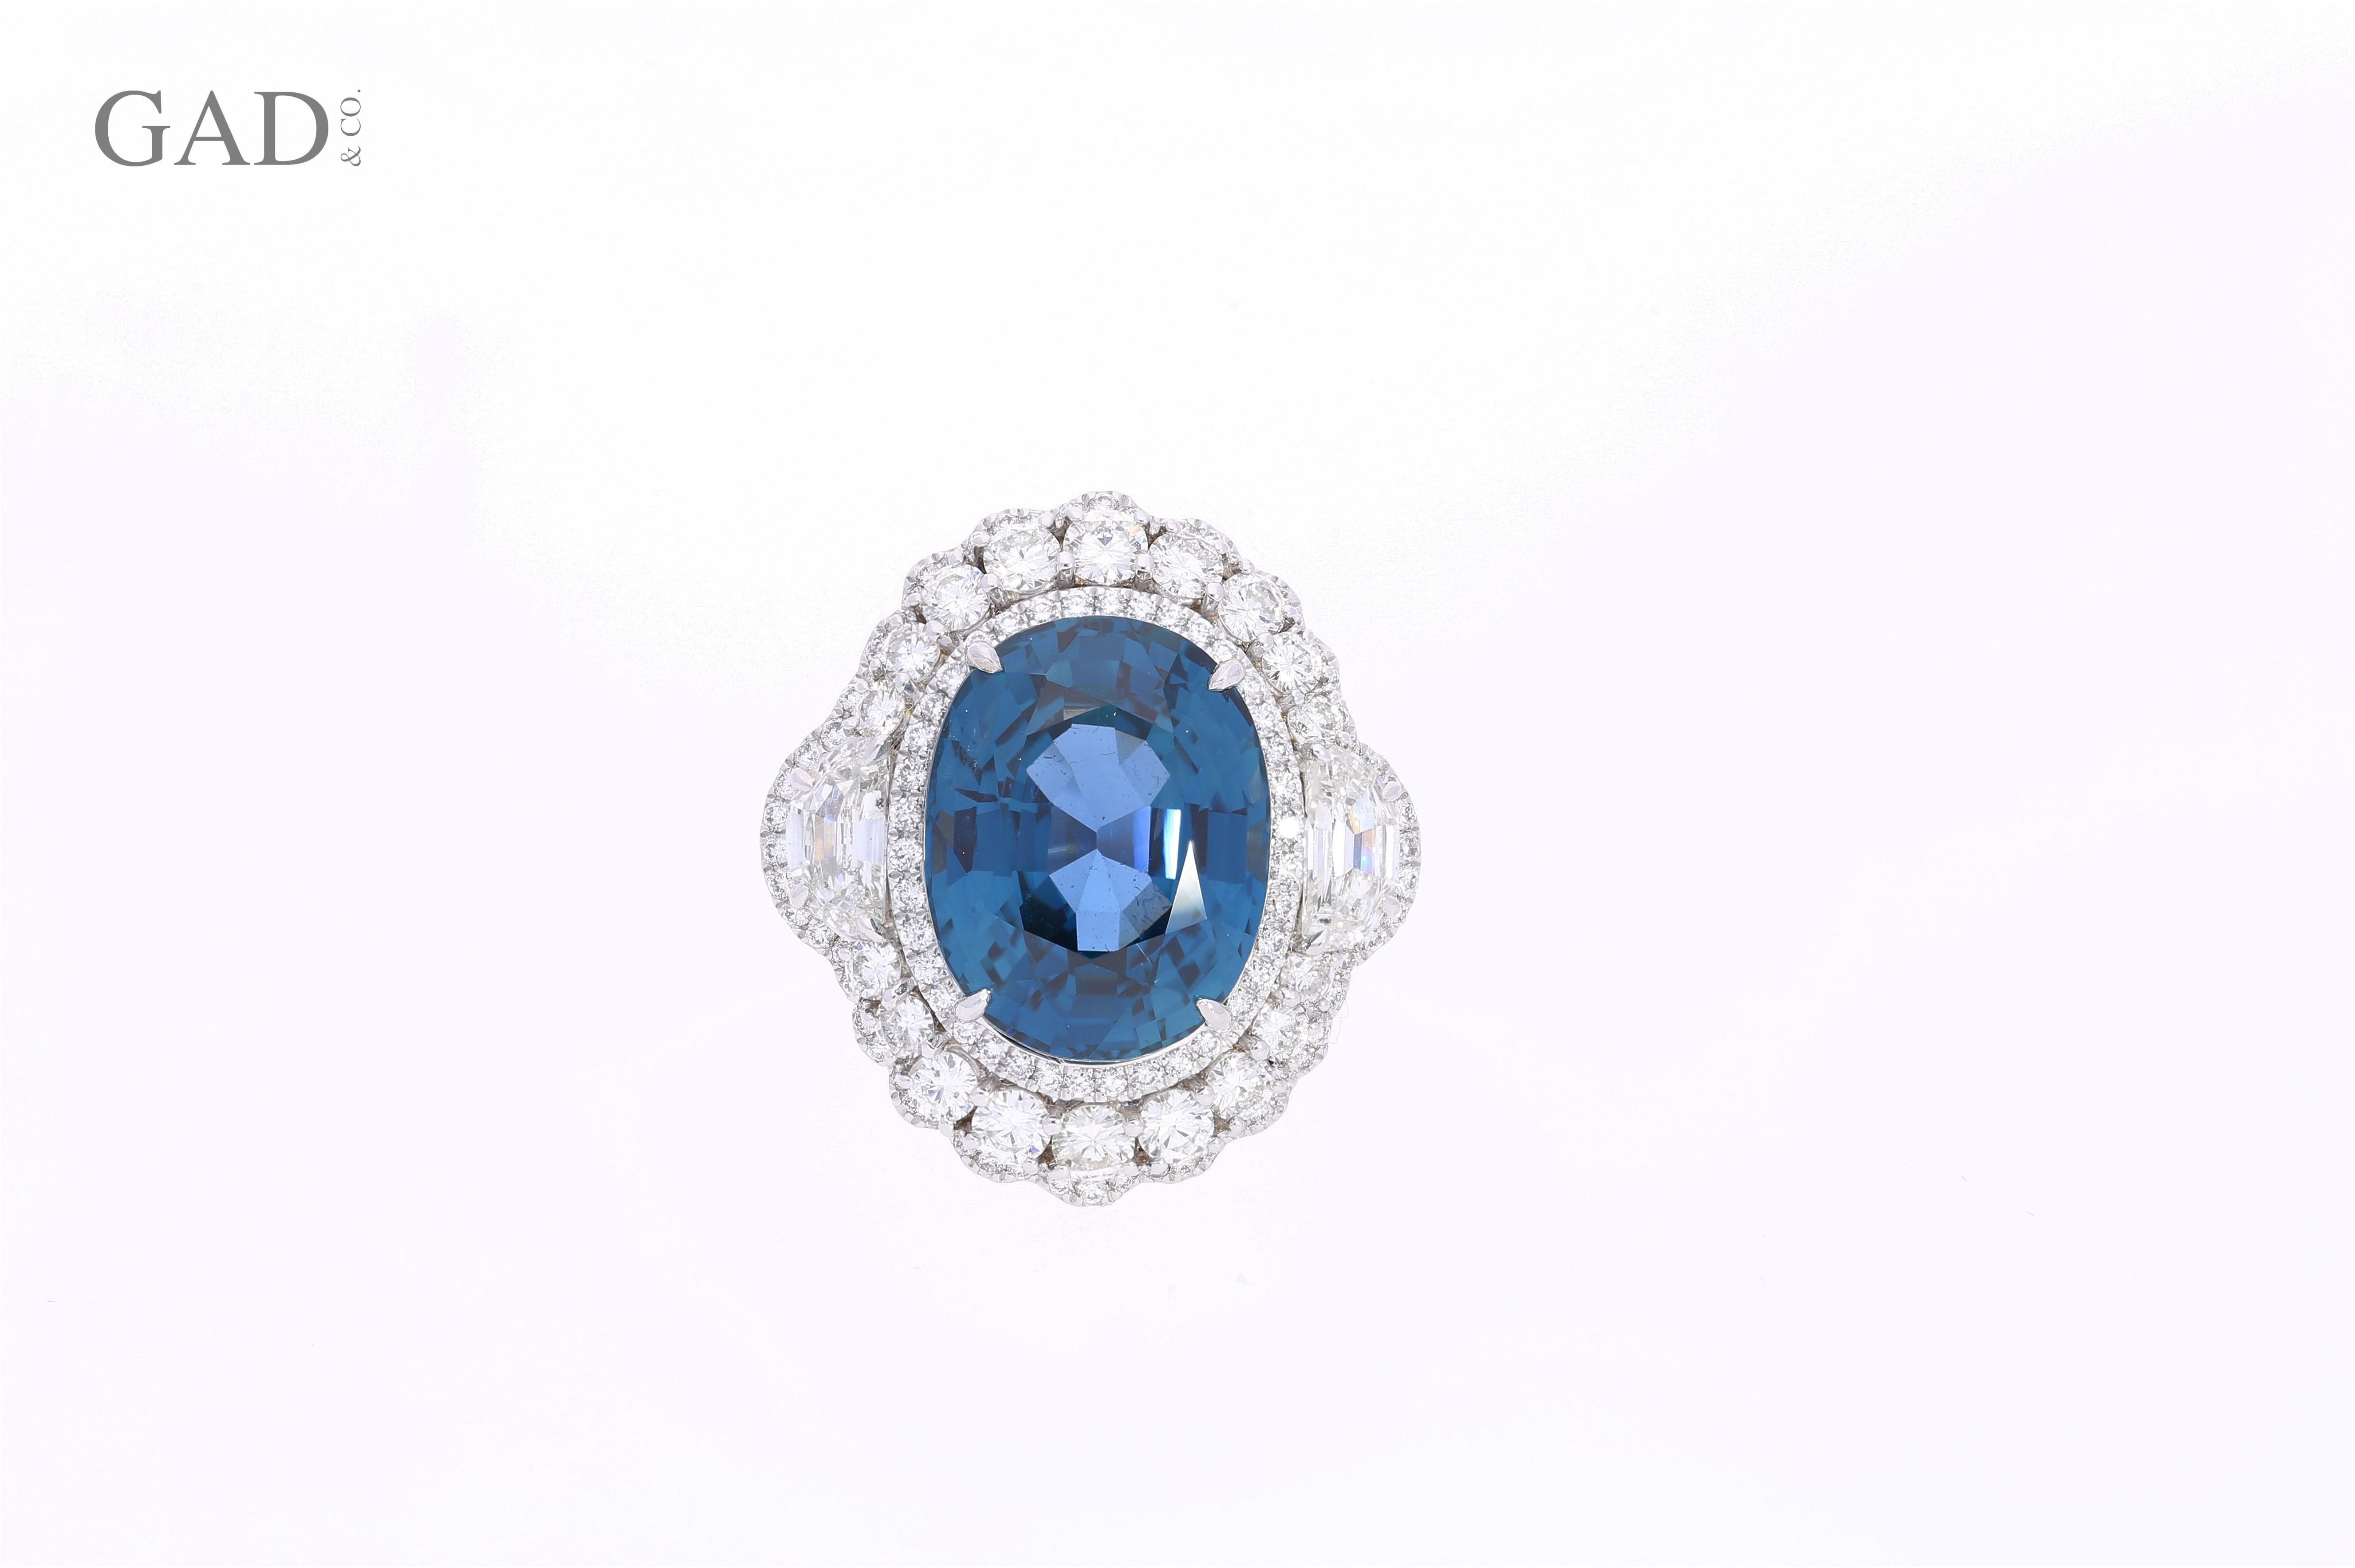 Centering a 18.16 Carat Oval-Cut Unheated Burma Sapphire, shouldered by two Half-Moon Cut Diamonds totaling 0.54 Carats, further accented by an additional 306 Round-Brilliant Cut Diamonds totaling 1.54 carats, and set in lush 18K White Gold, this